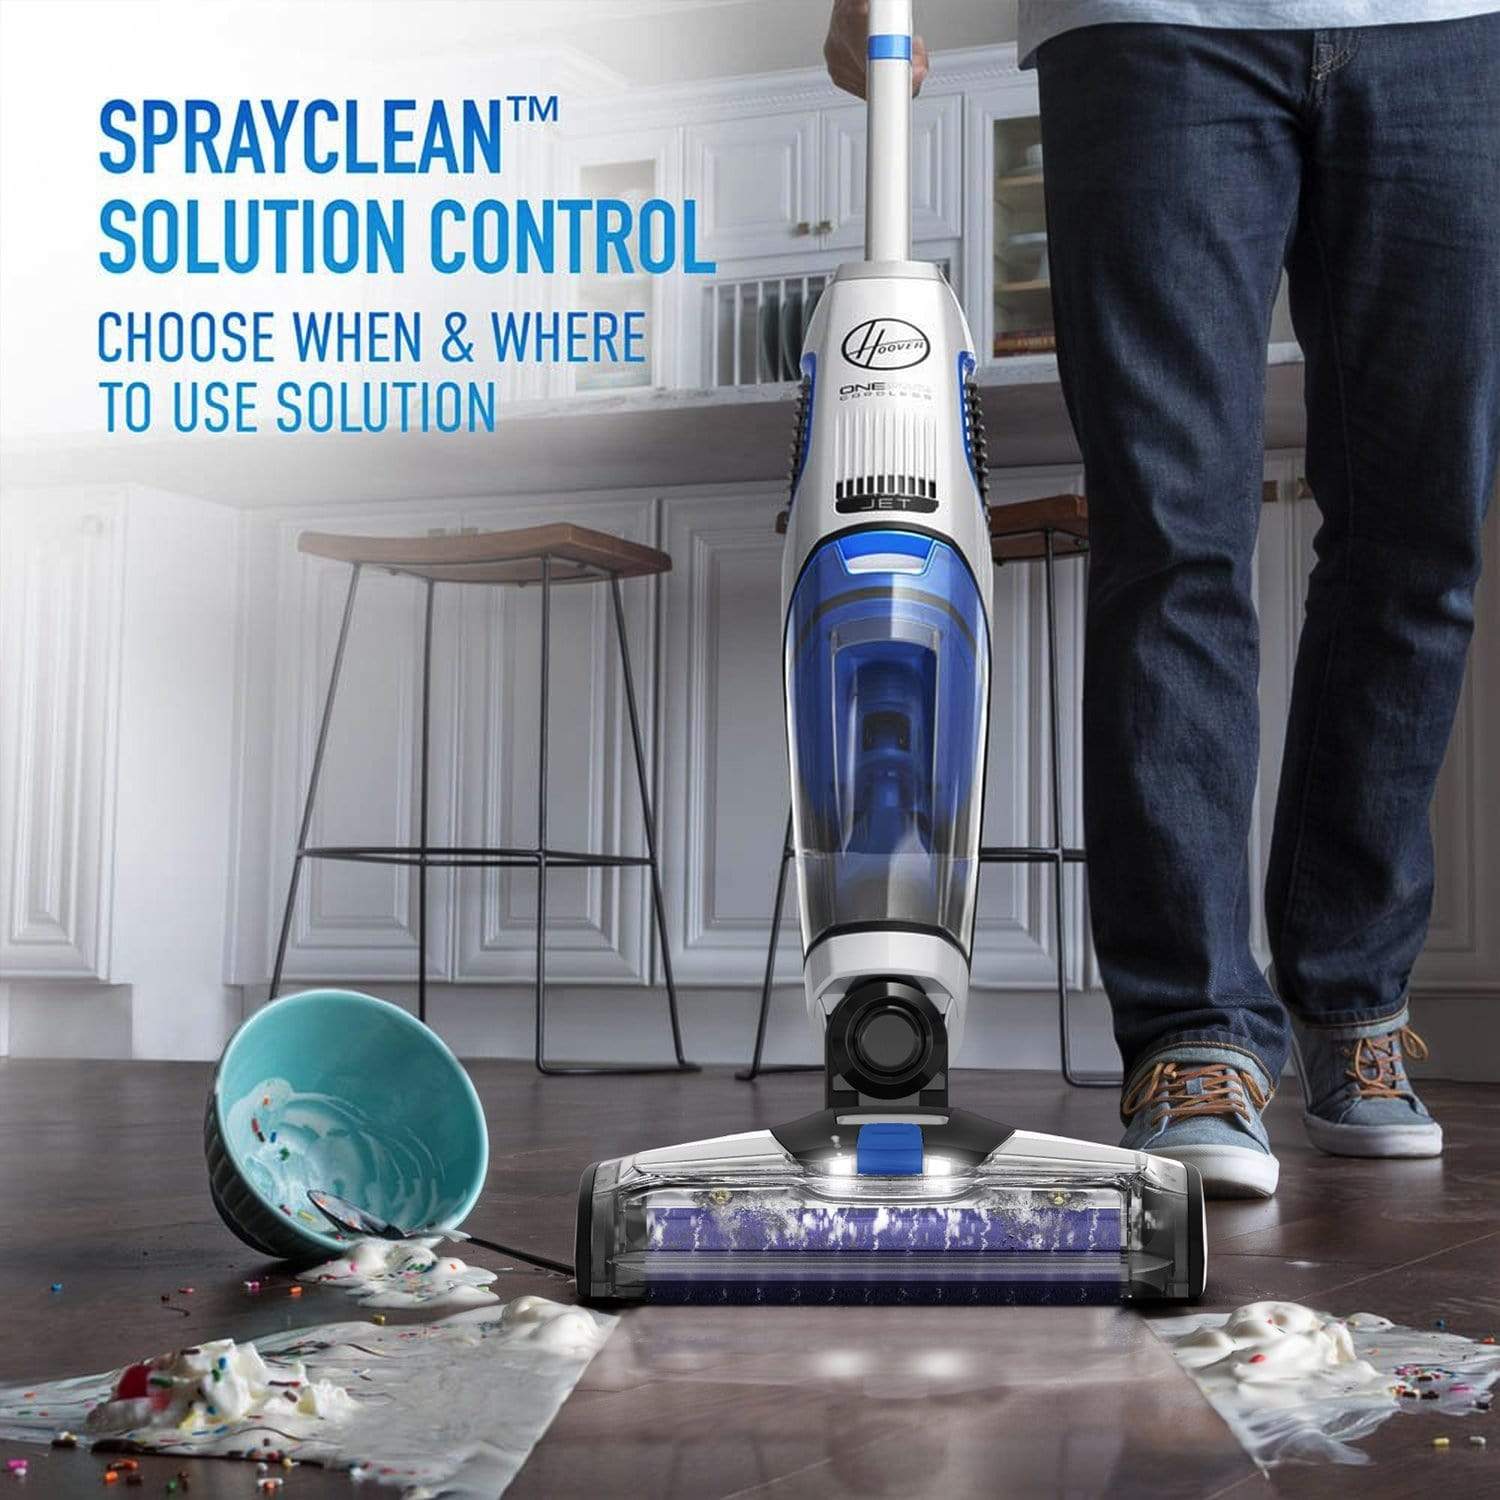 Hoover ONEPWR Floormate Jet Cordless Vacuum Cleaner